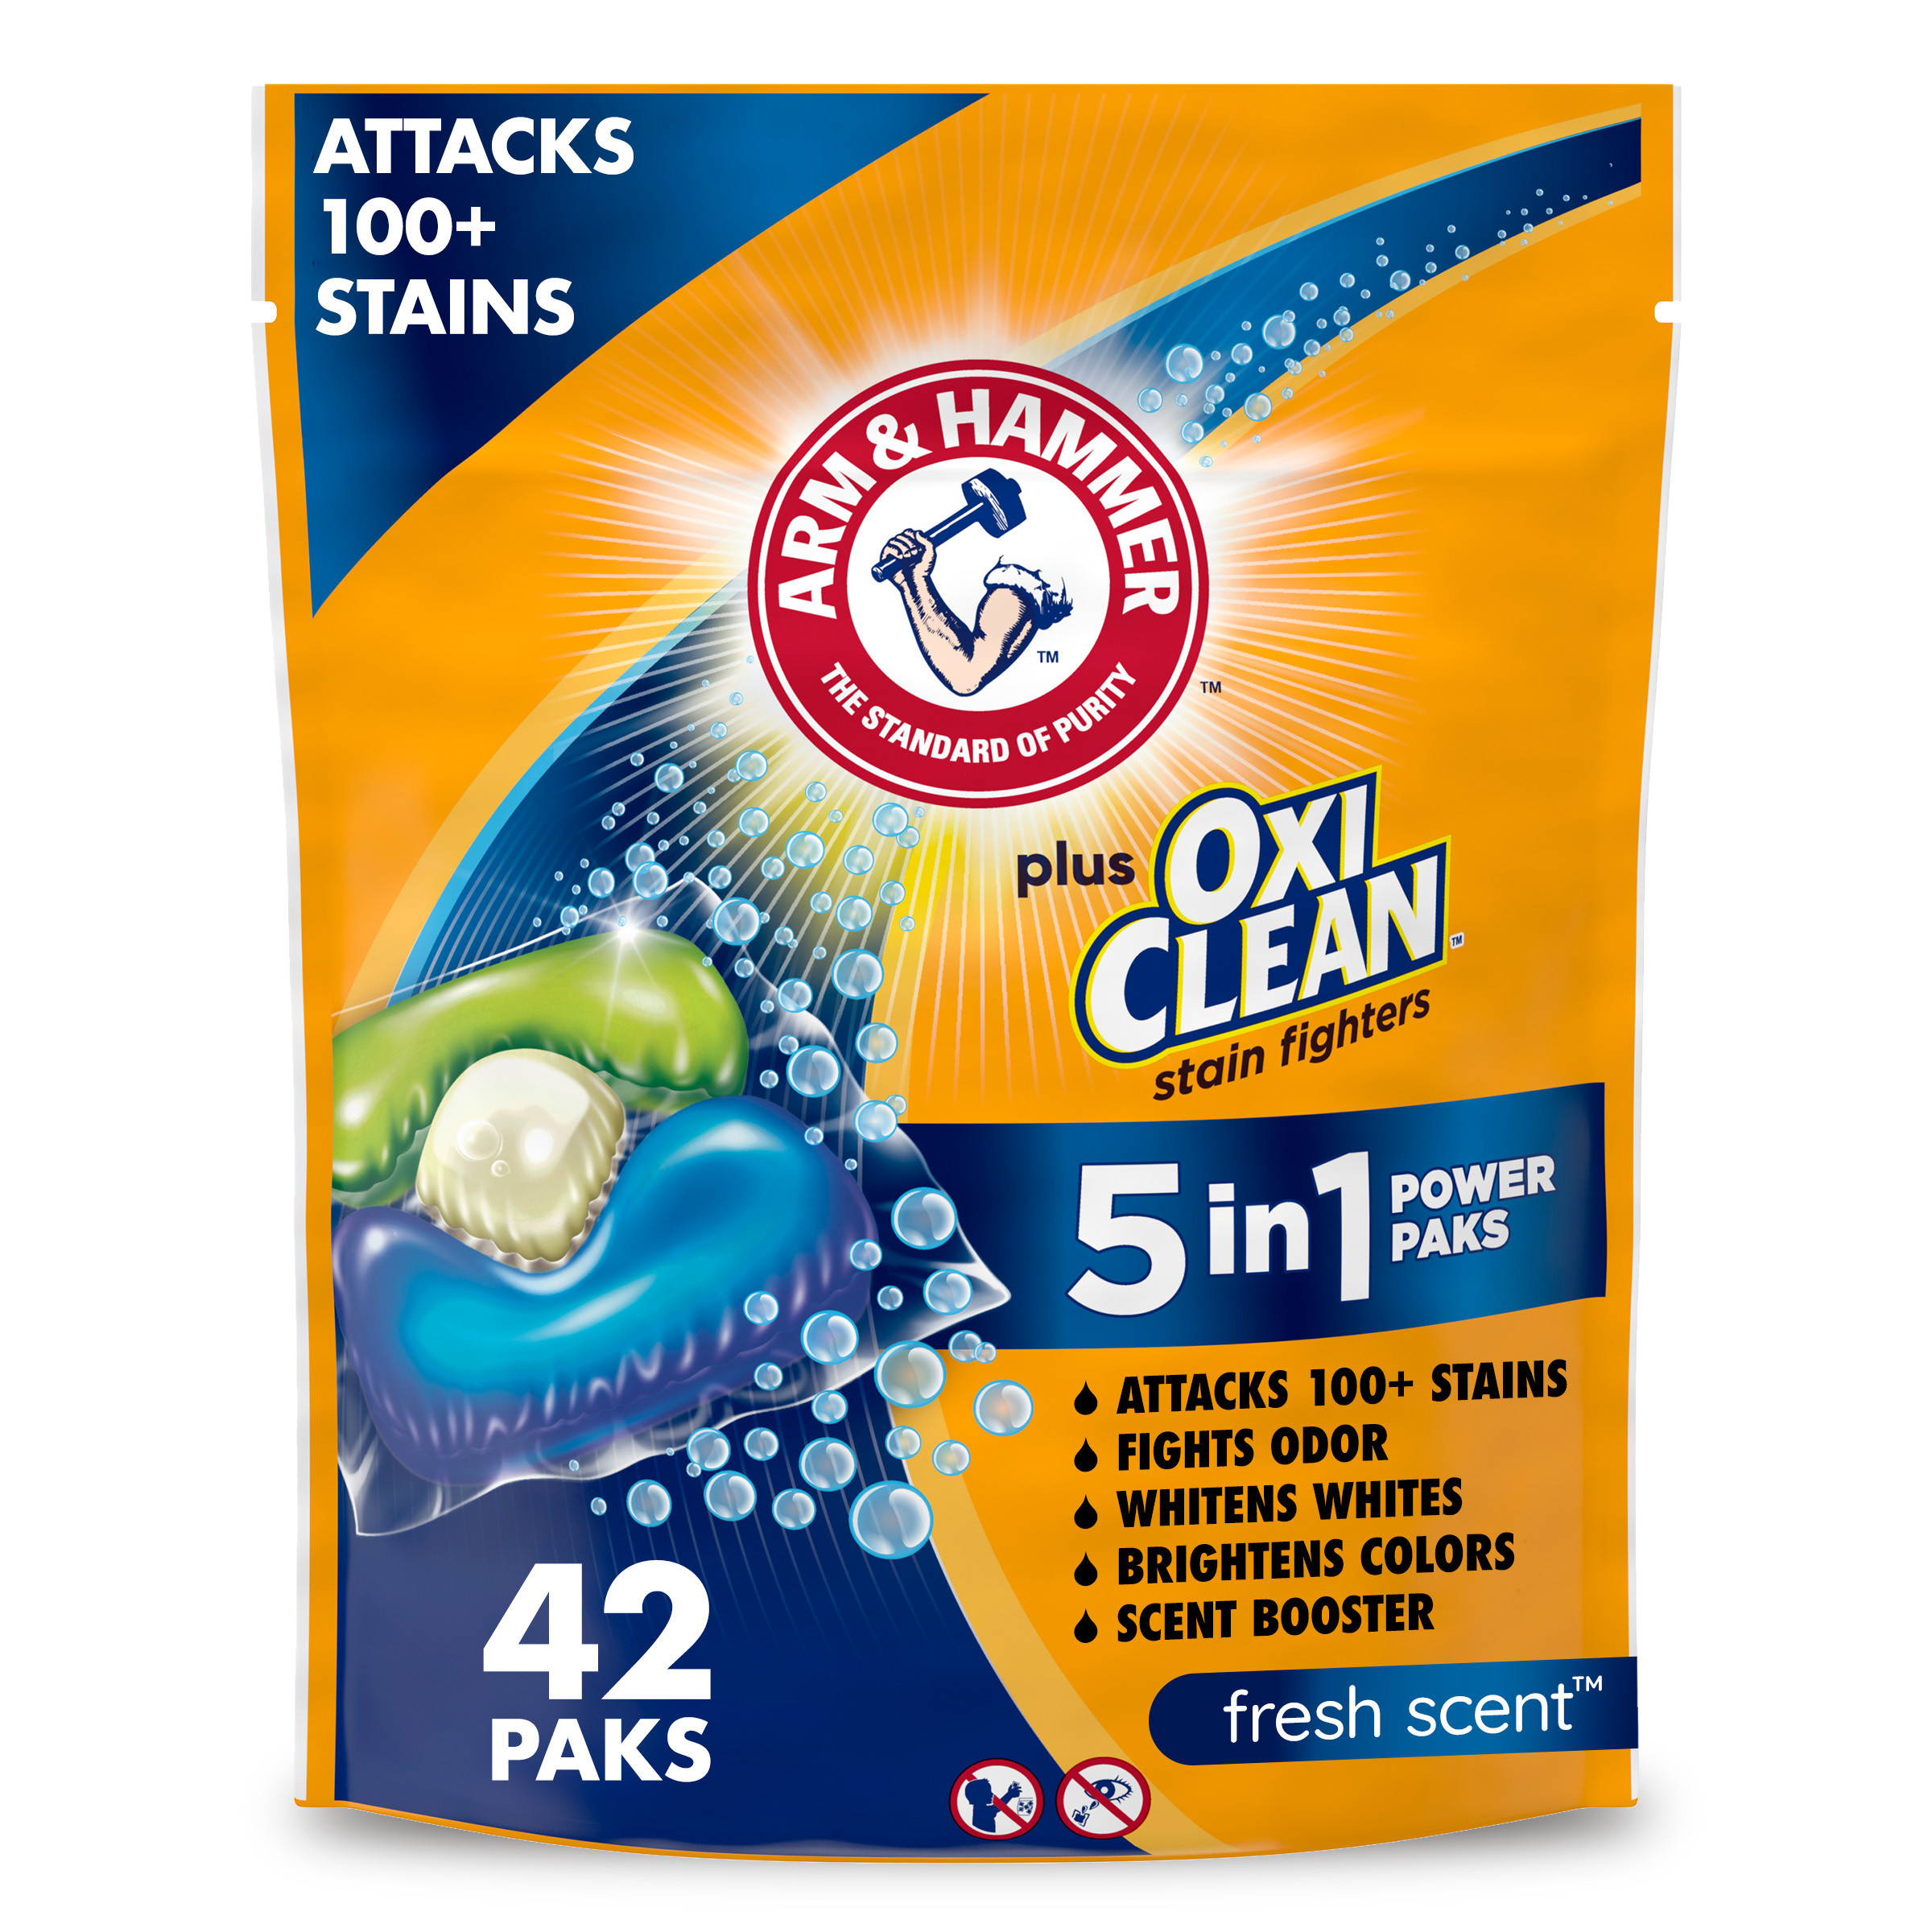 ARM & HAMMER Plus OxiClean 5-in-1 Laundry Detergent Power Paks, 42 Count - image 1 of 15